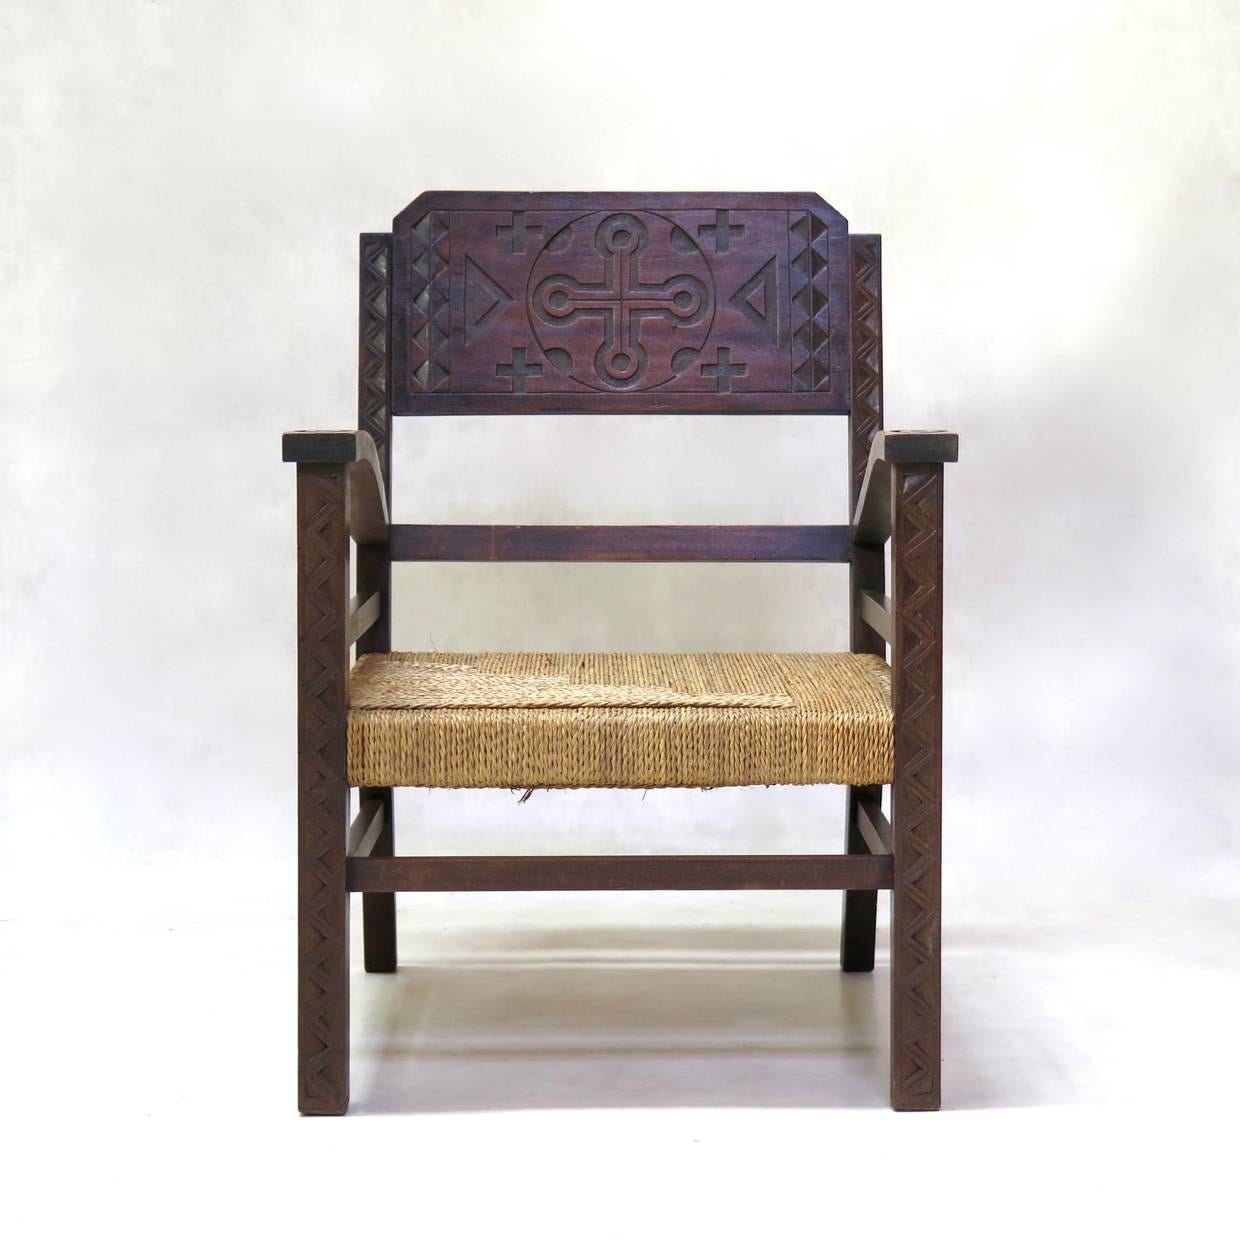 Handsome pair of armchairs, very much in the style of Francis Jourdain. The wood structure is carved with geometric, African-inspired motifs. The woven rush seats also have a nice geometric pattern.